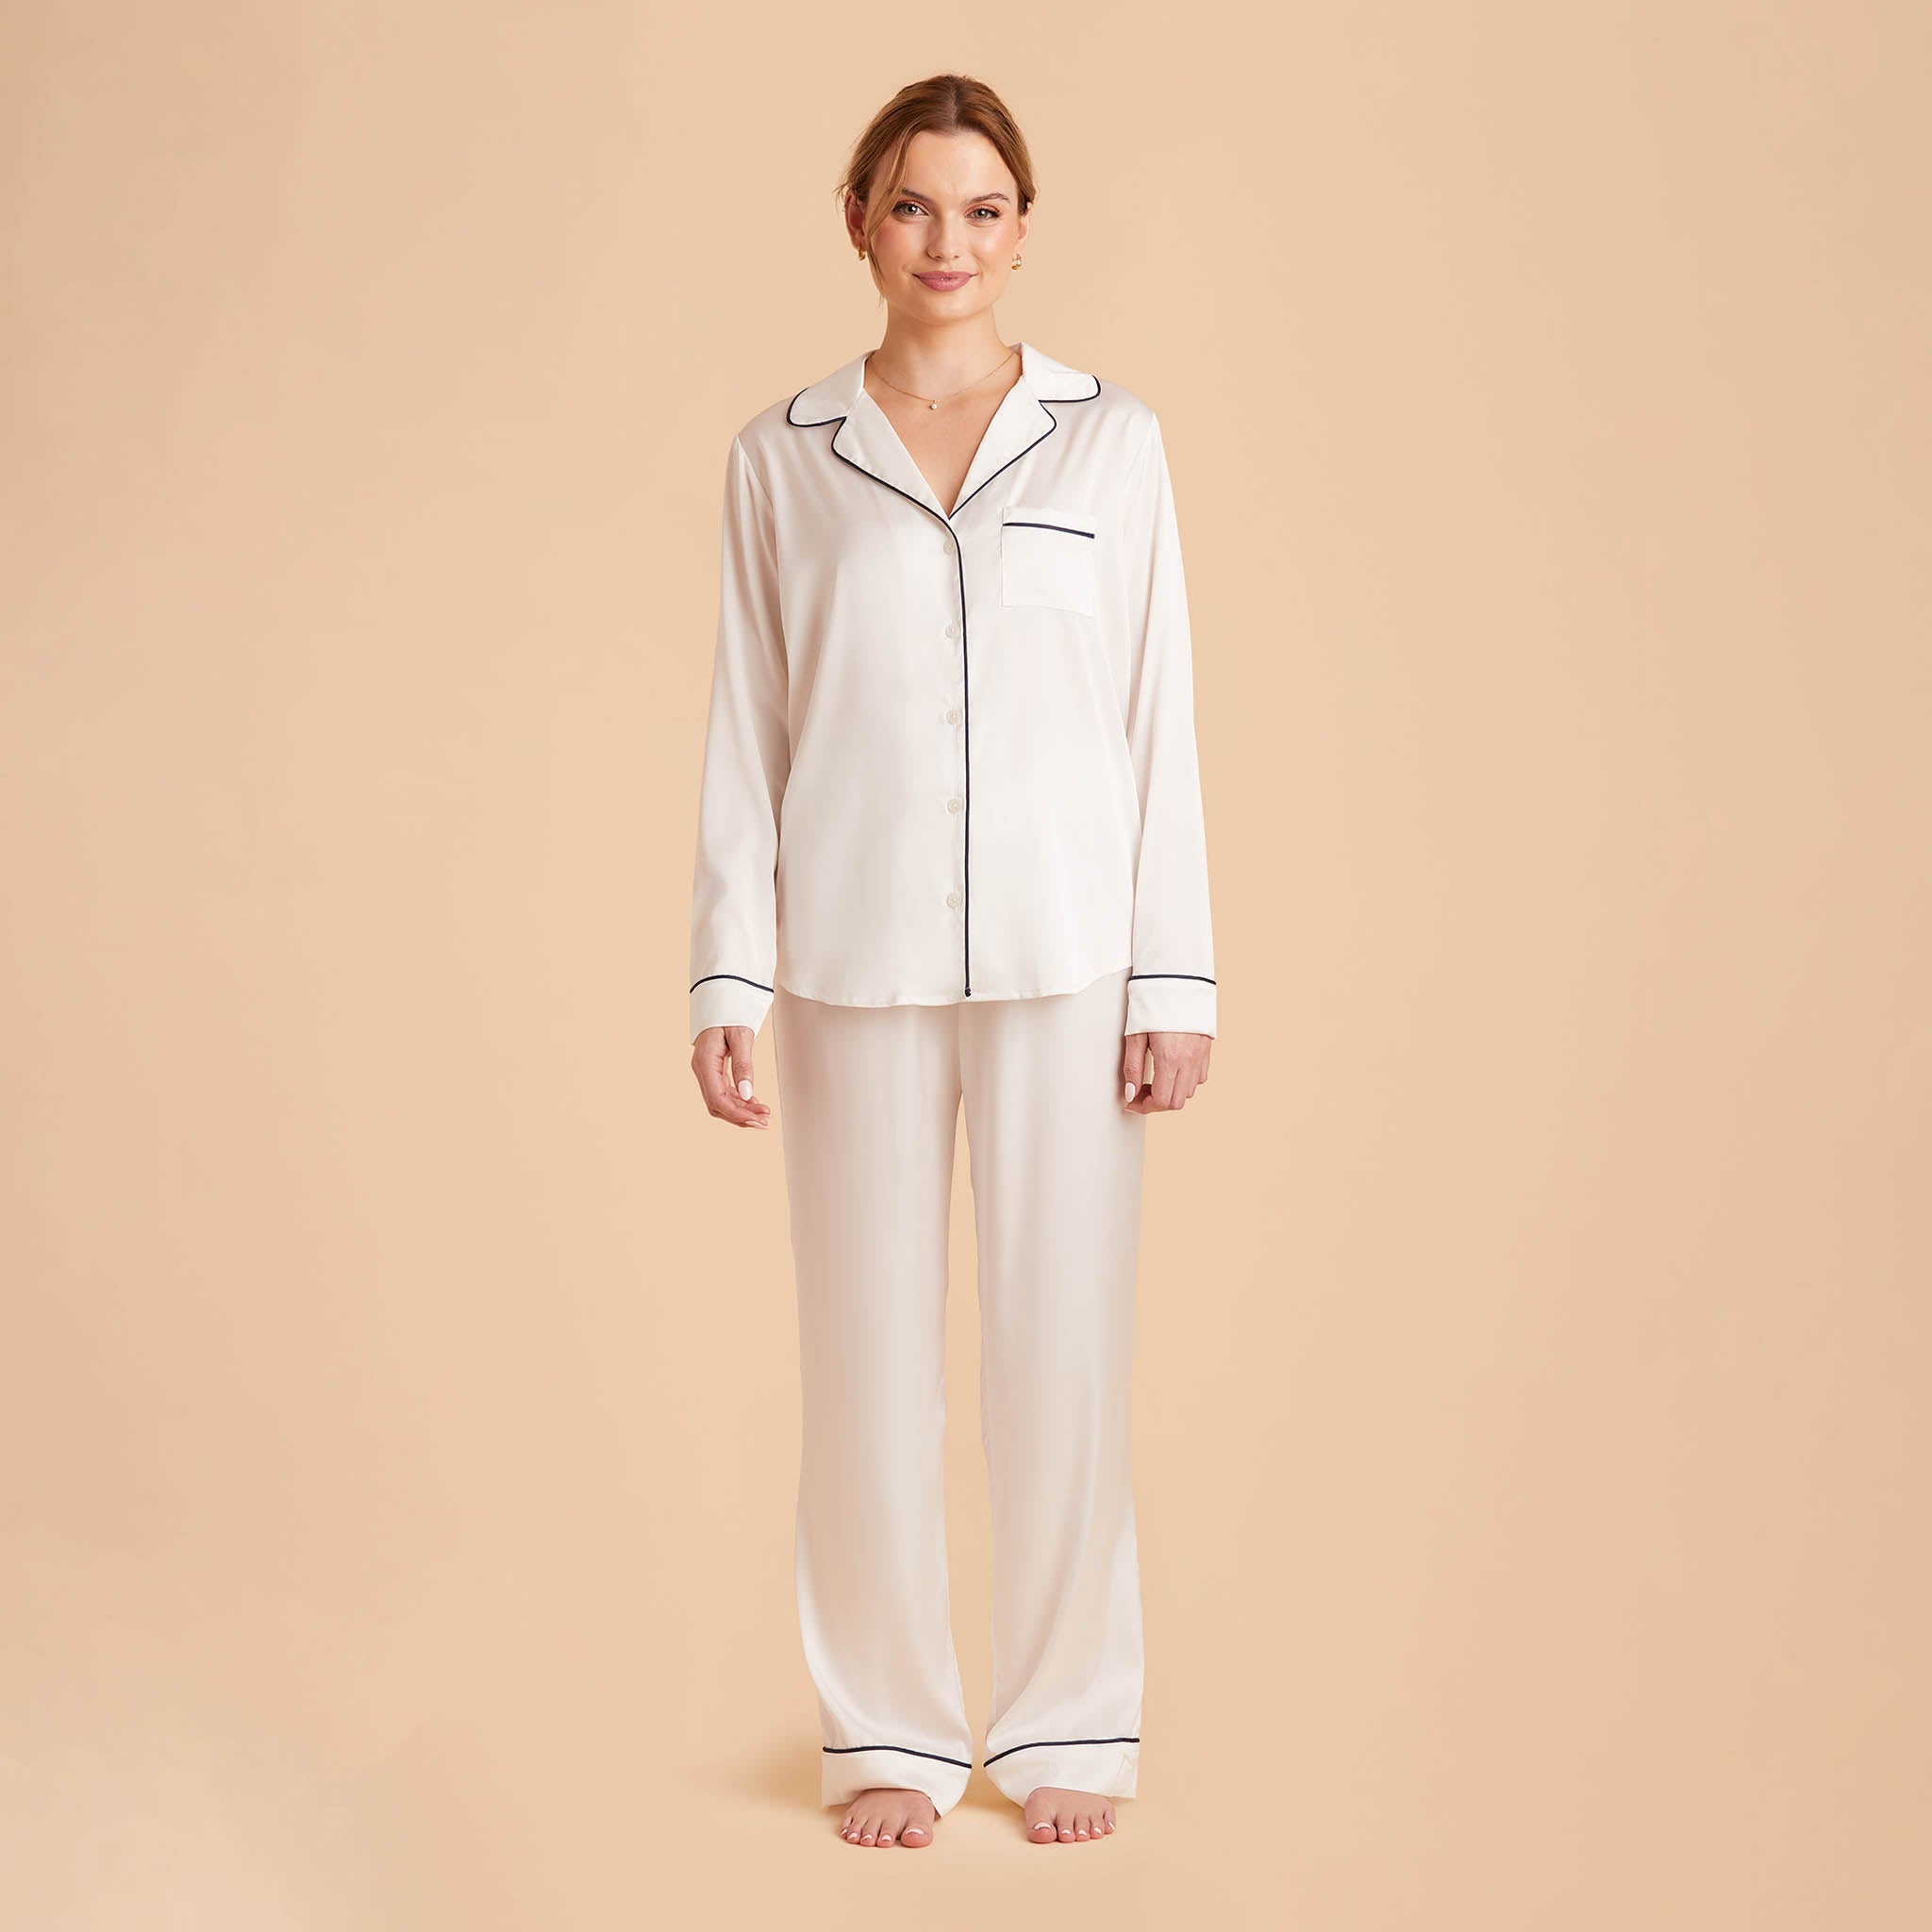 Jonny Satin Pants Bridesmaid Pajamas With White Piping in ivory, front view